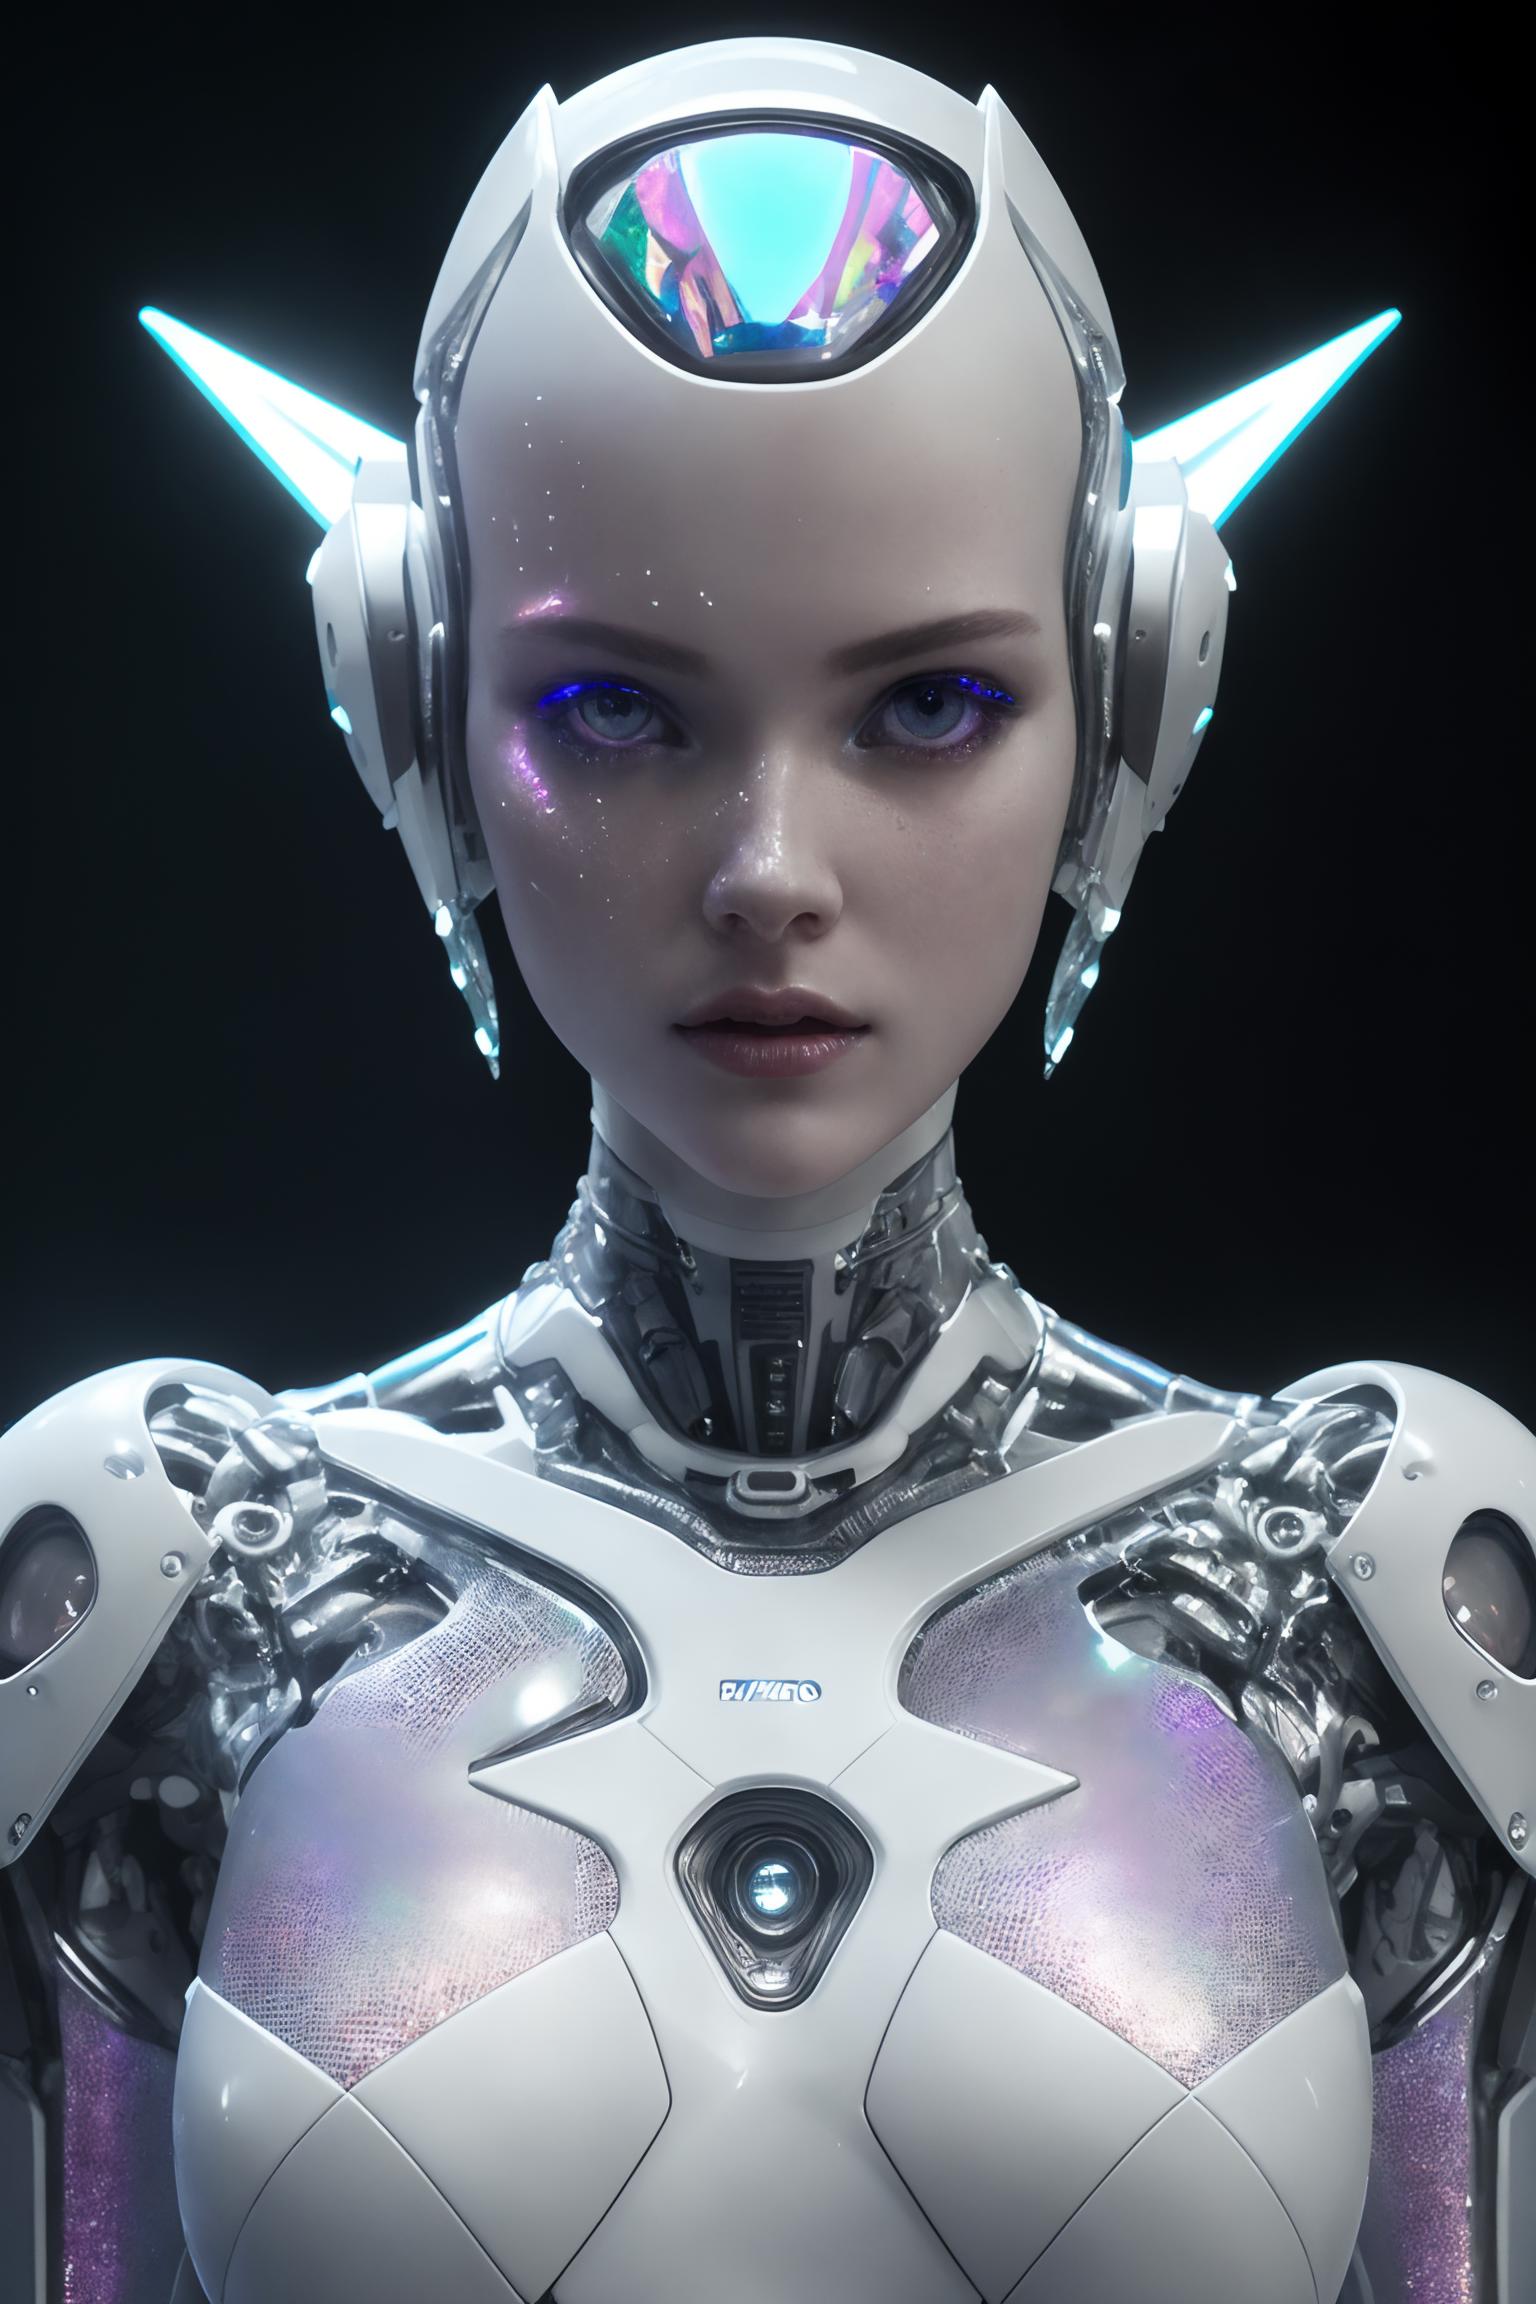 Cyborg Woman with Blue Eyes and Purple Light on Her Head.